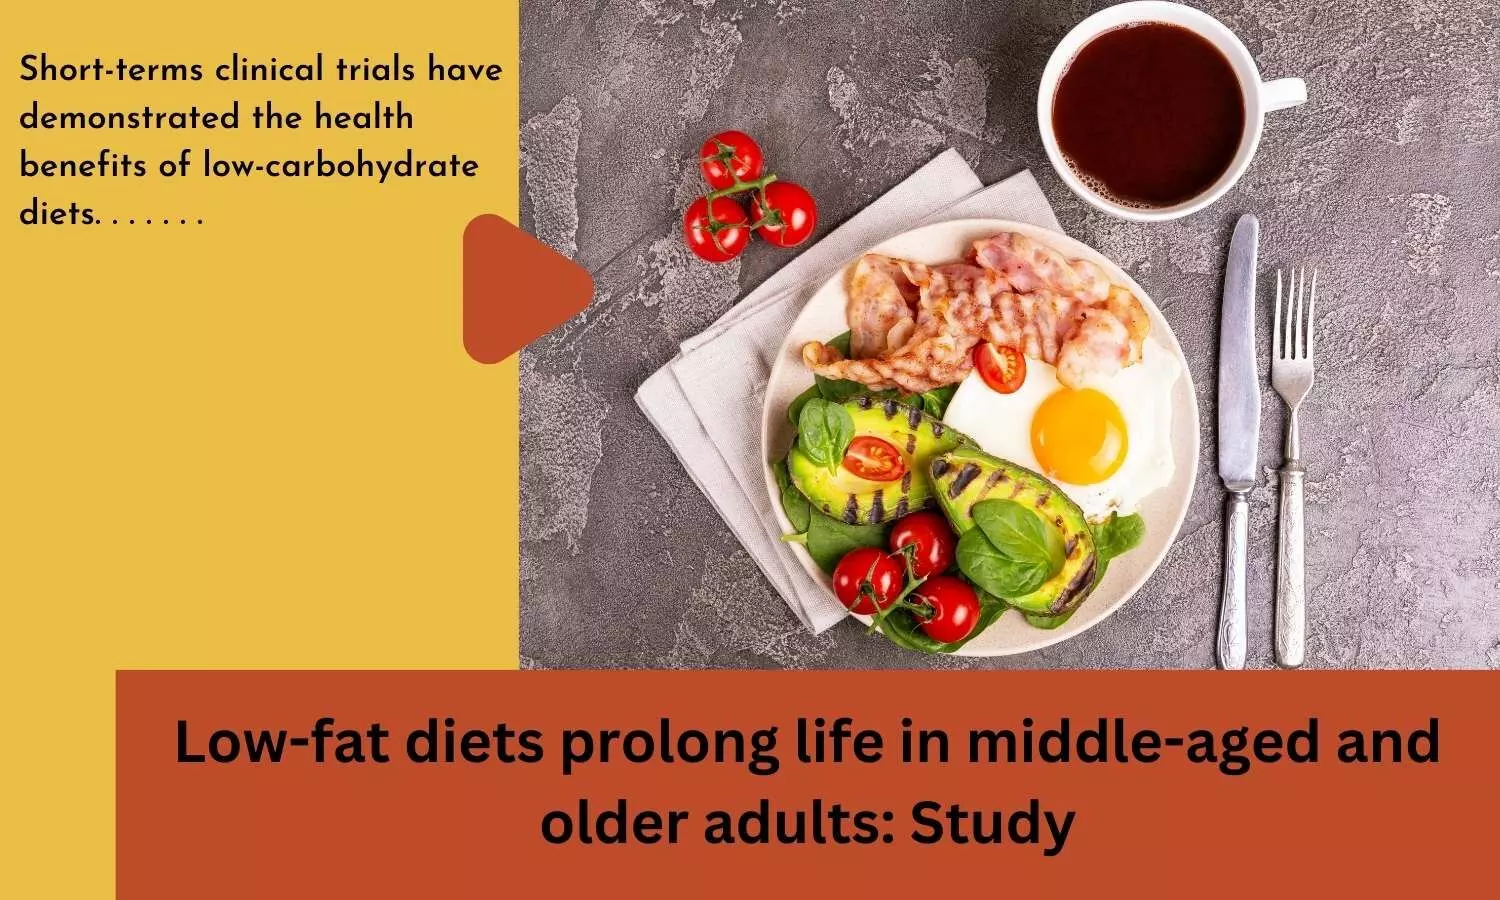 Low-fat diets prolong life in middle-aged and older adults: Study